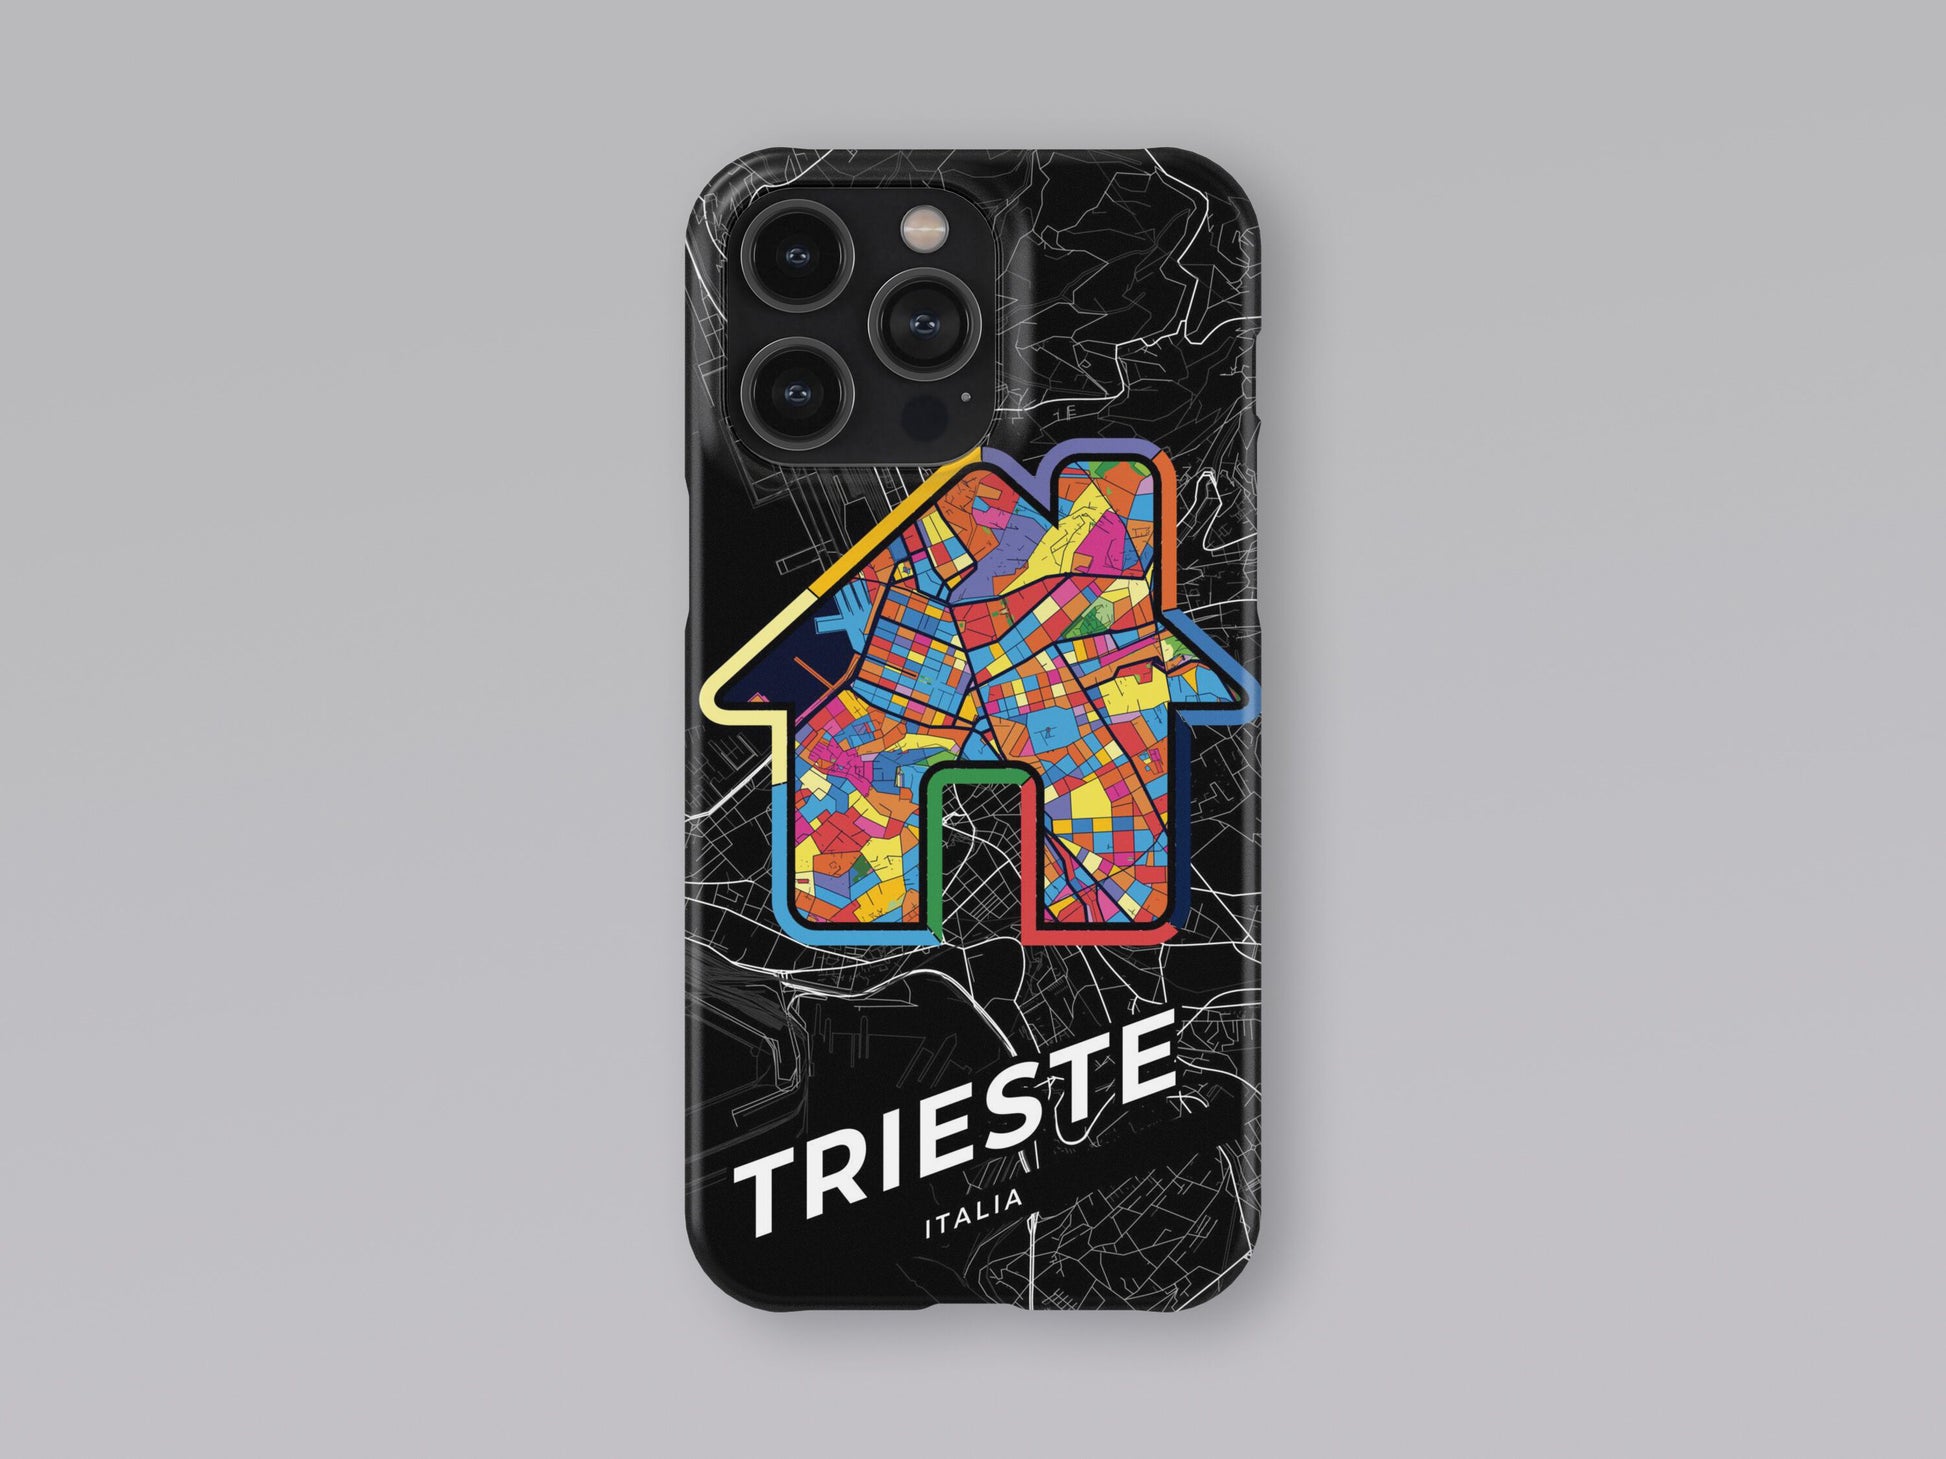 Trieste Italy slim phone case with colorful icon 3